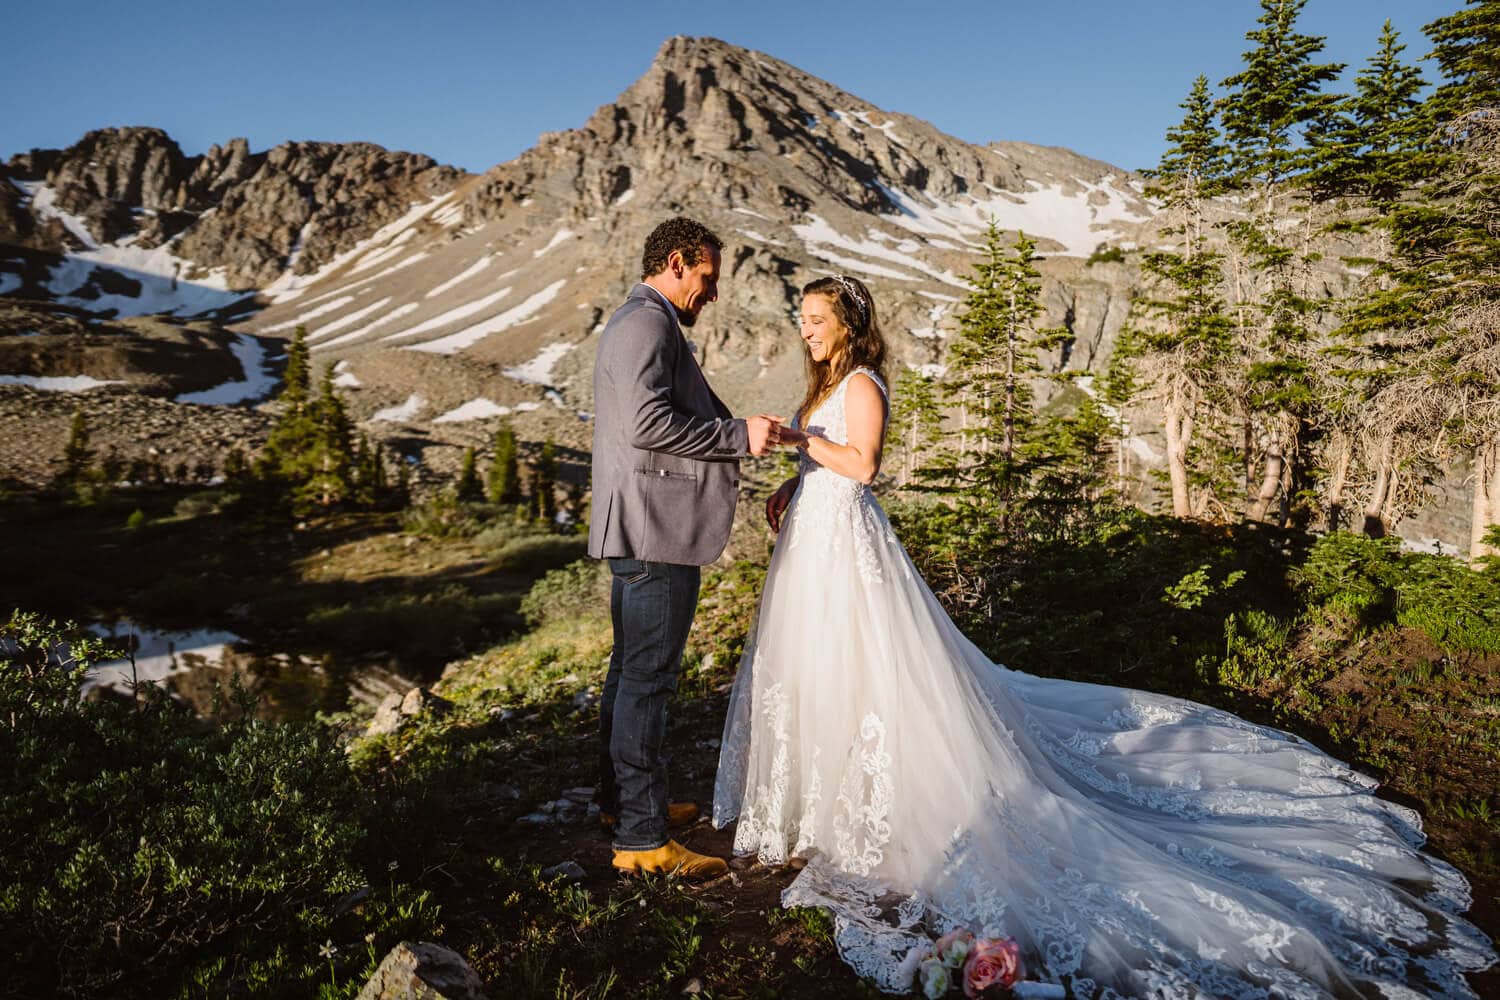 A couple exchanging their rings in the mountains of Colorado.